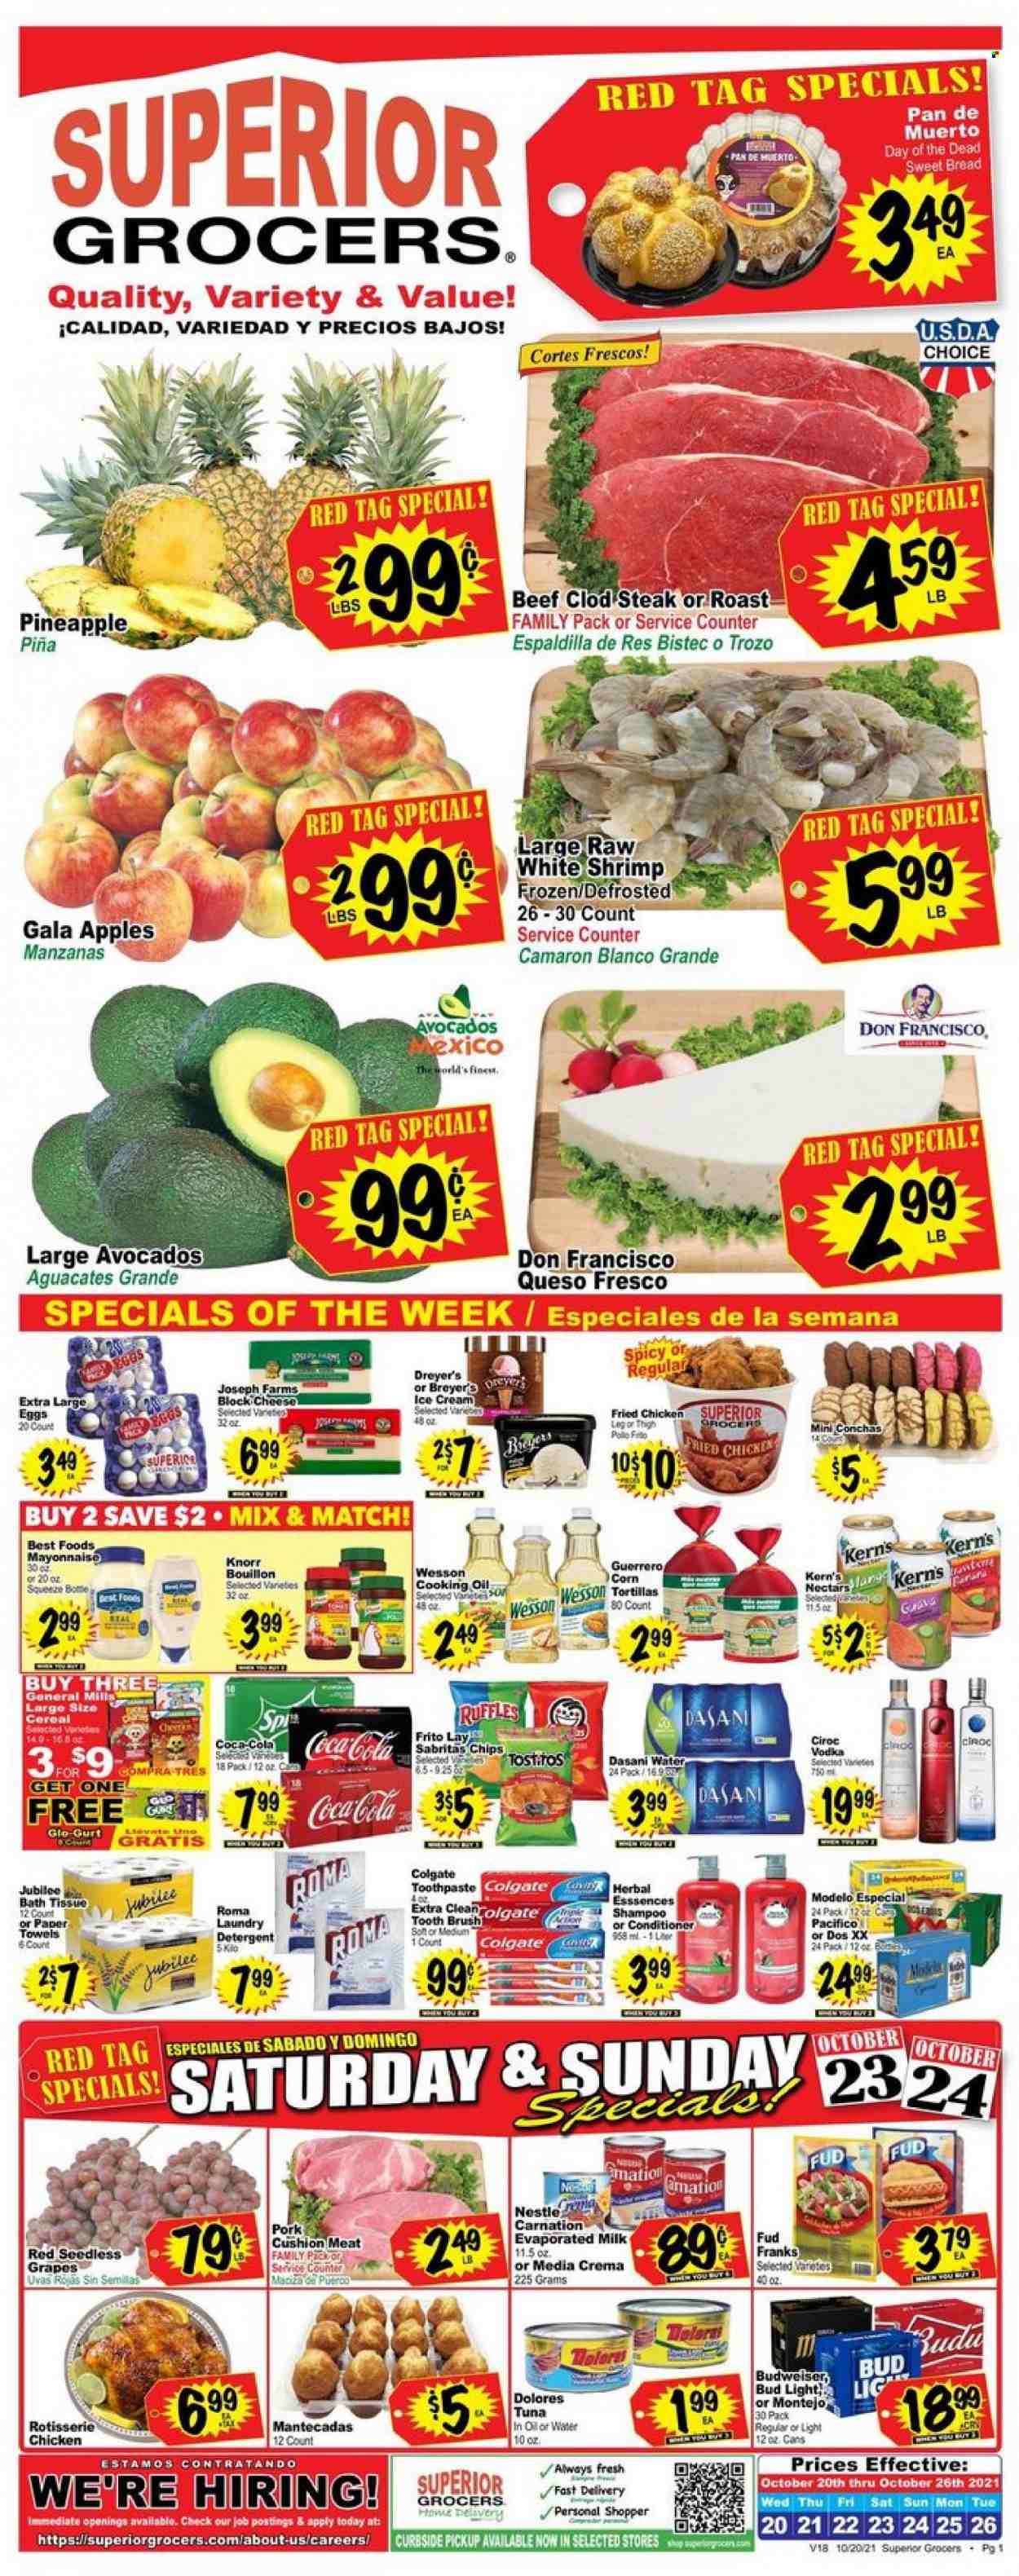 thumbnail - Superior Grocers Flyer - 10/20/2021 - 10/26/2021 - Sales products - seedless grapes, bread, corn tortillas, tortillas, sweet bread, apples, avocado, Gala, grapes, guava, pineapple, steak, tuna, shrimps, chicken roast, Knorr, fried chicken, queso fresco, cheese, evaporated milk, large eggs, mayonnaise, ice cream, Nestlé, Ruffles, bouillon, cereals, oil, Coca-Cola, Kern's, vodka, Cîroc, beer, Bud Light, Modelo, laundry detergent, Colgate, toothbrush, toothpaste, conditioner, pan, bread pan, Budweiser. Page 1.